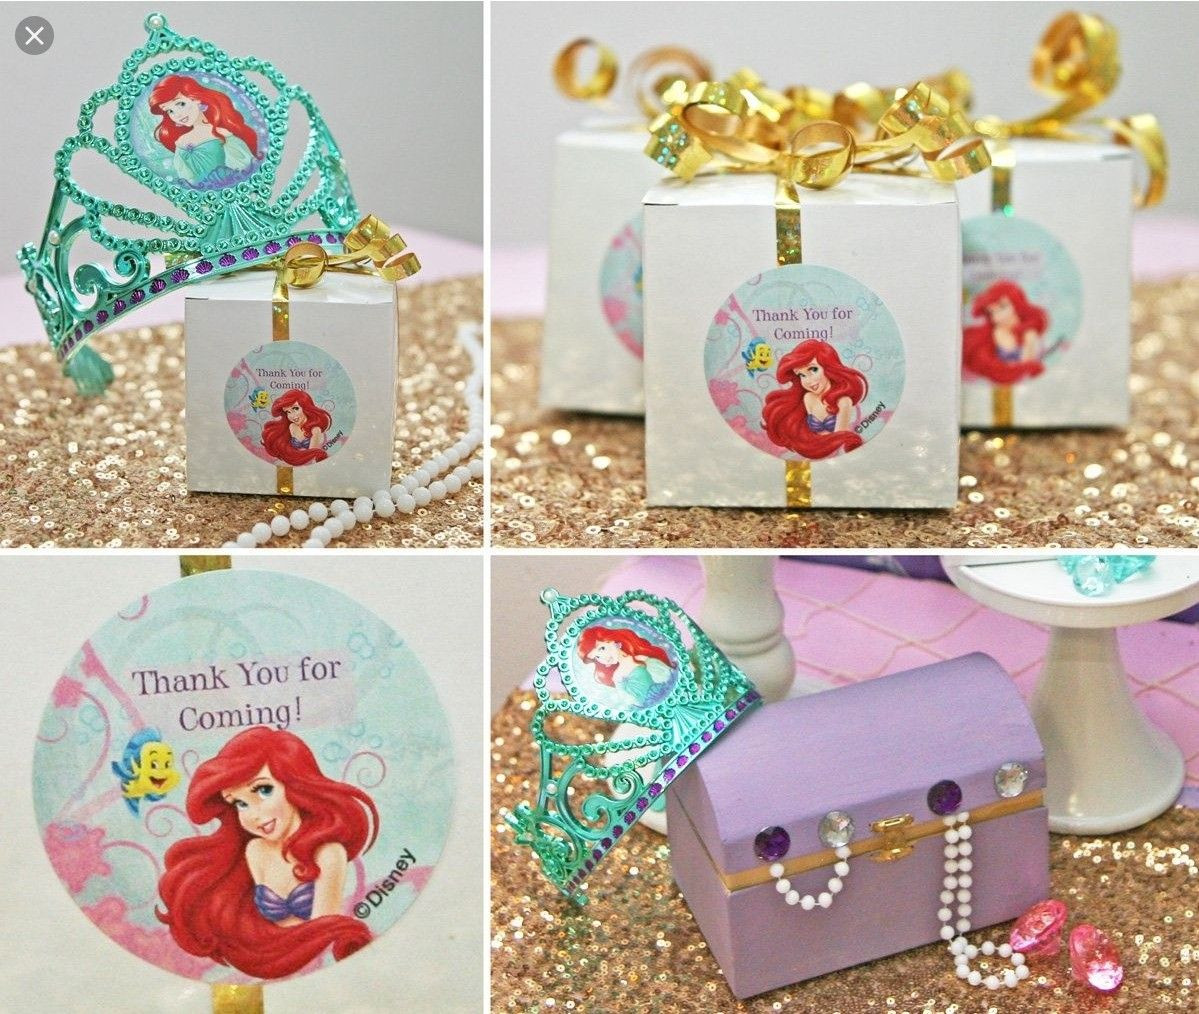 Ariel The Little Mermaid Party Ideas
 Pin by Kerri Molloy on Little Mermaid Party